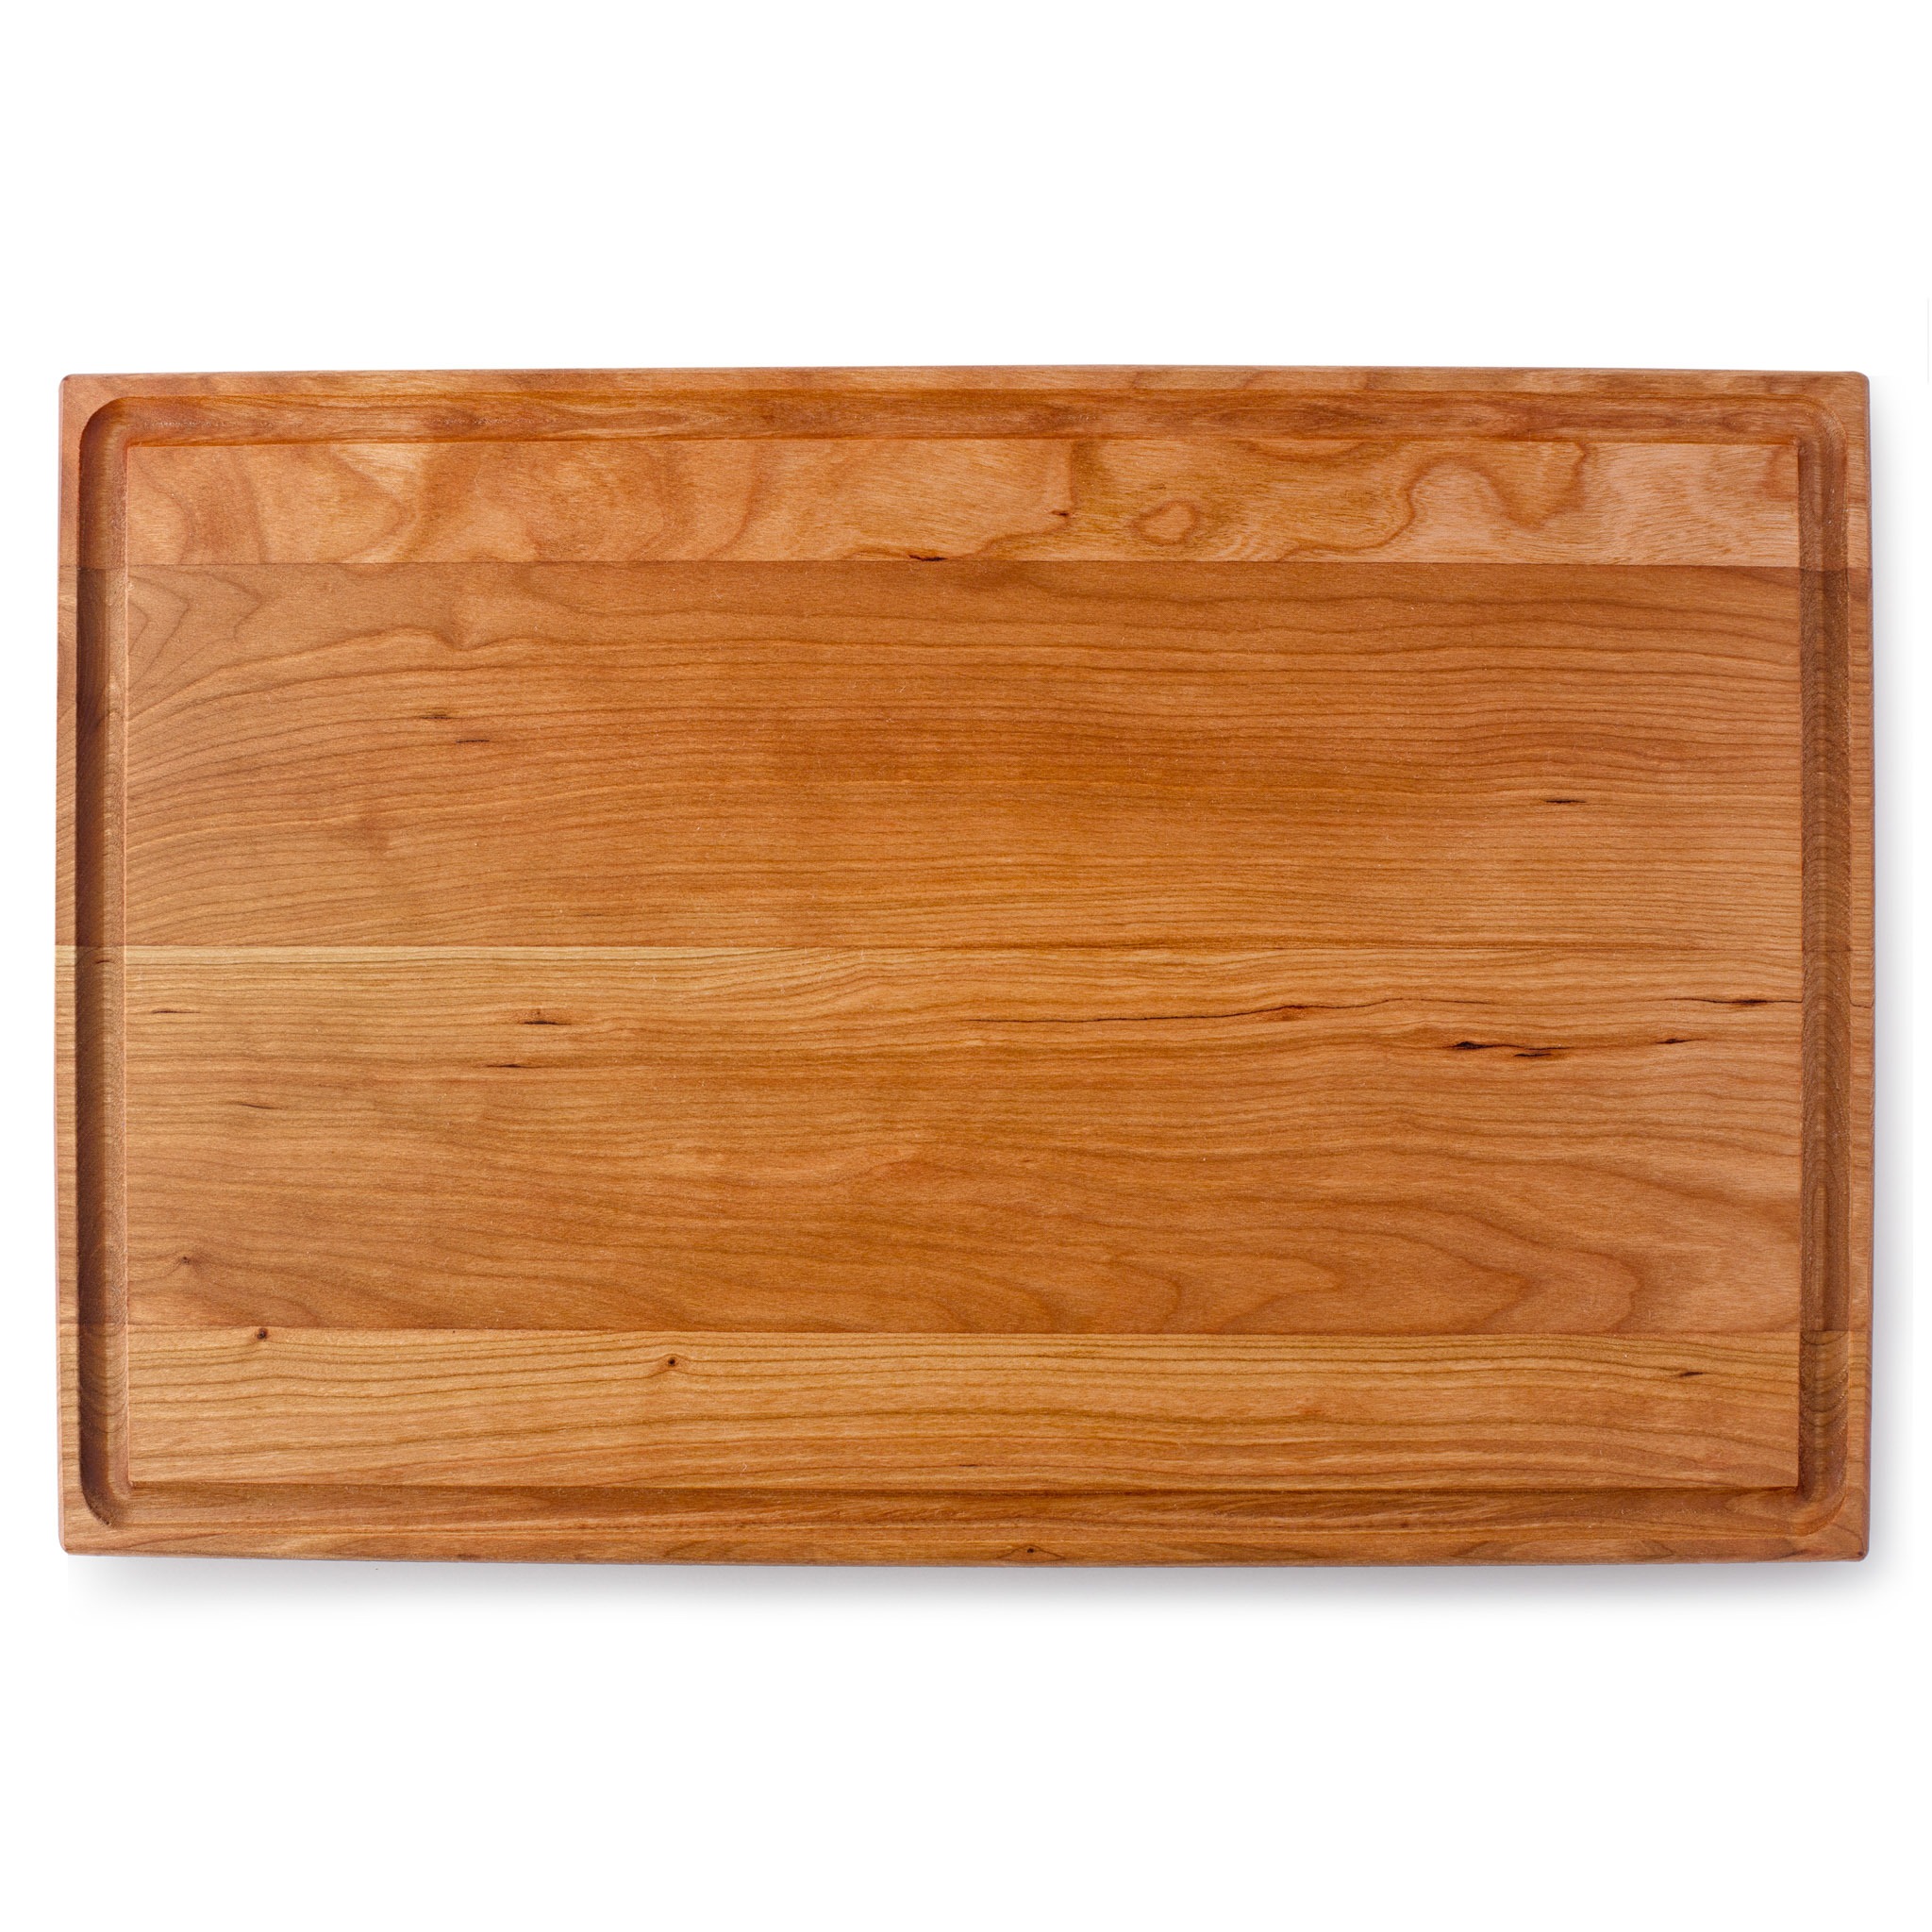 Wooden Cutting Boards Forest Decor 